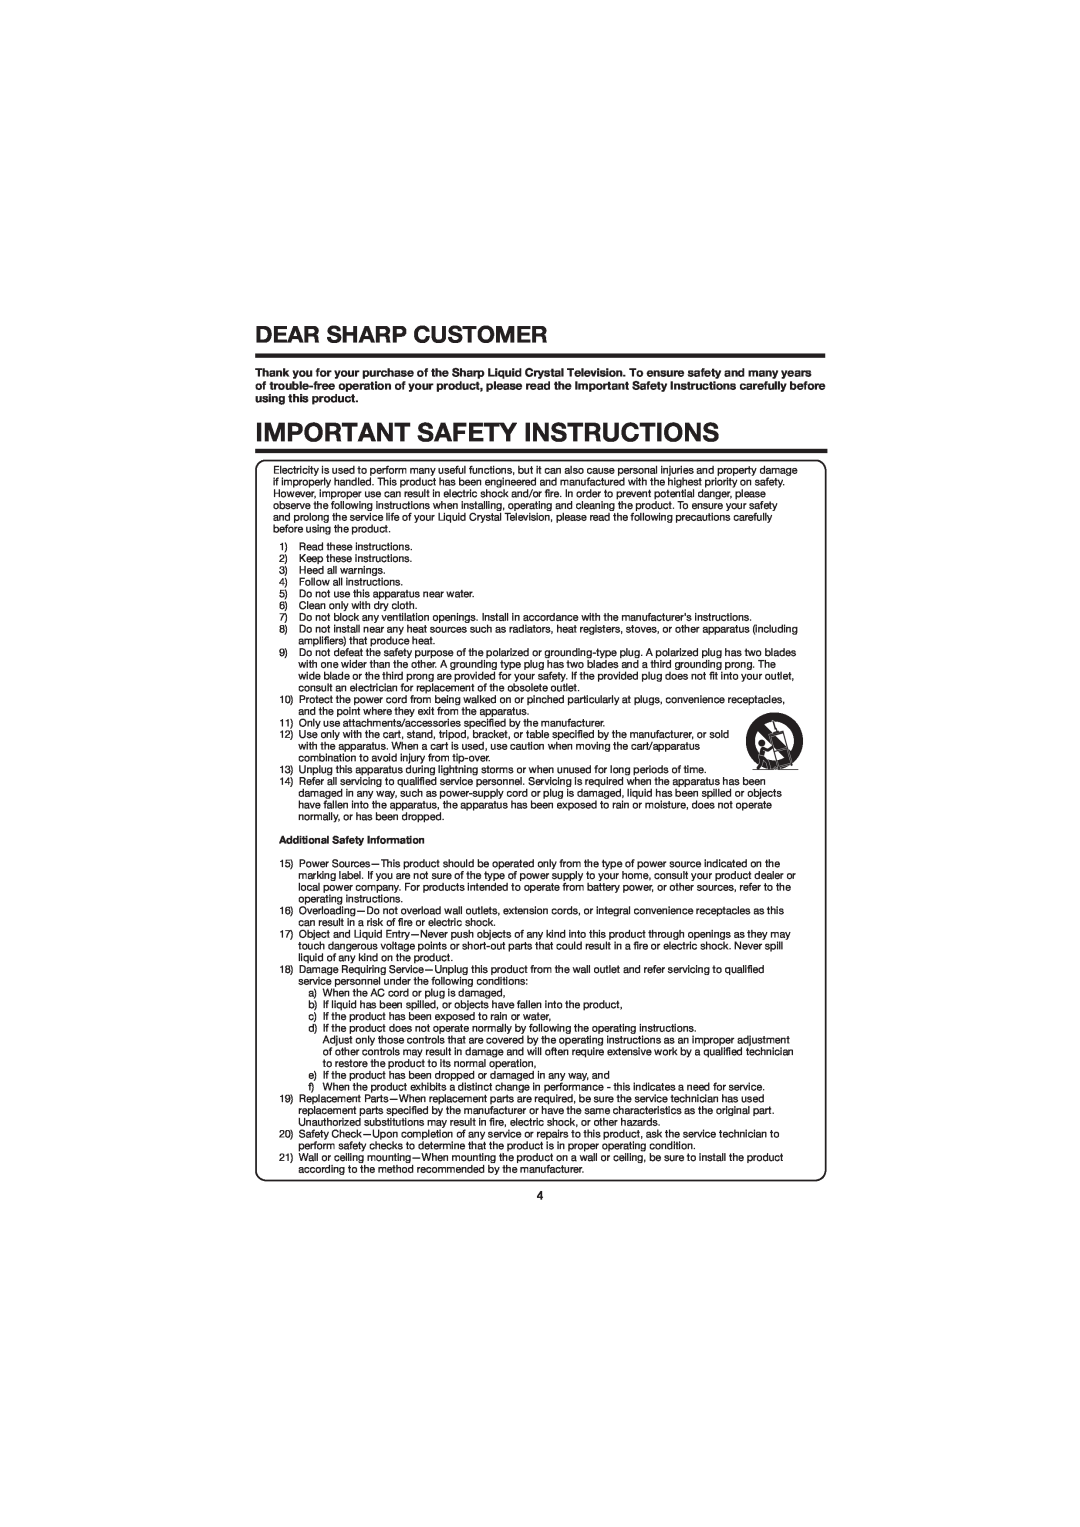 Sharp LC-60E79U operation manual Important Safety Instructions, Dear Sharp Customer, Additional Safety Information 